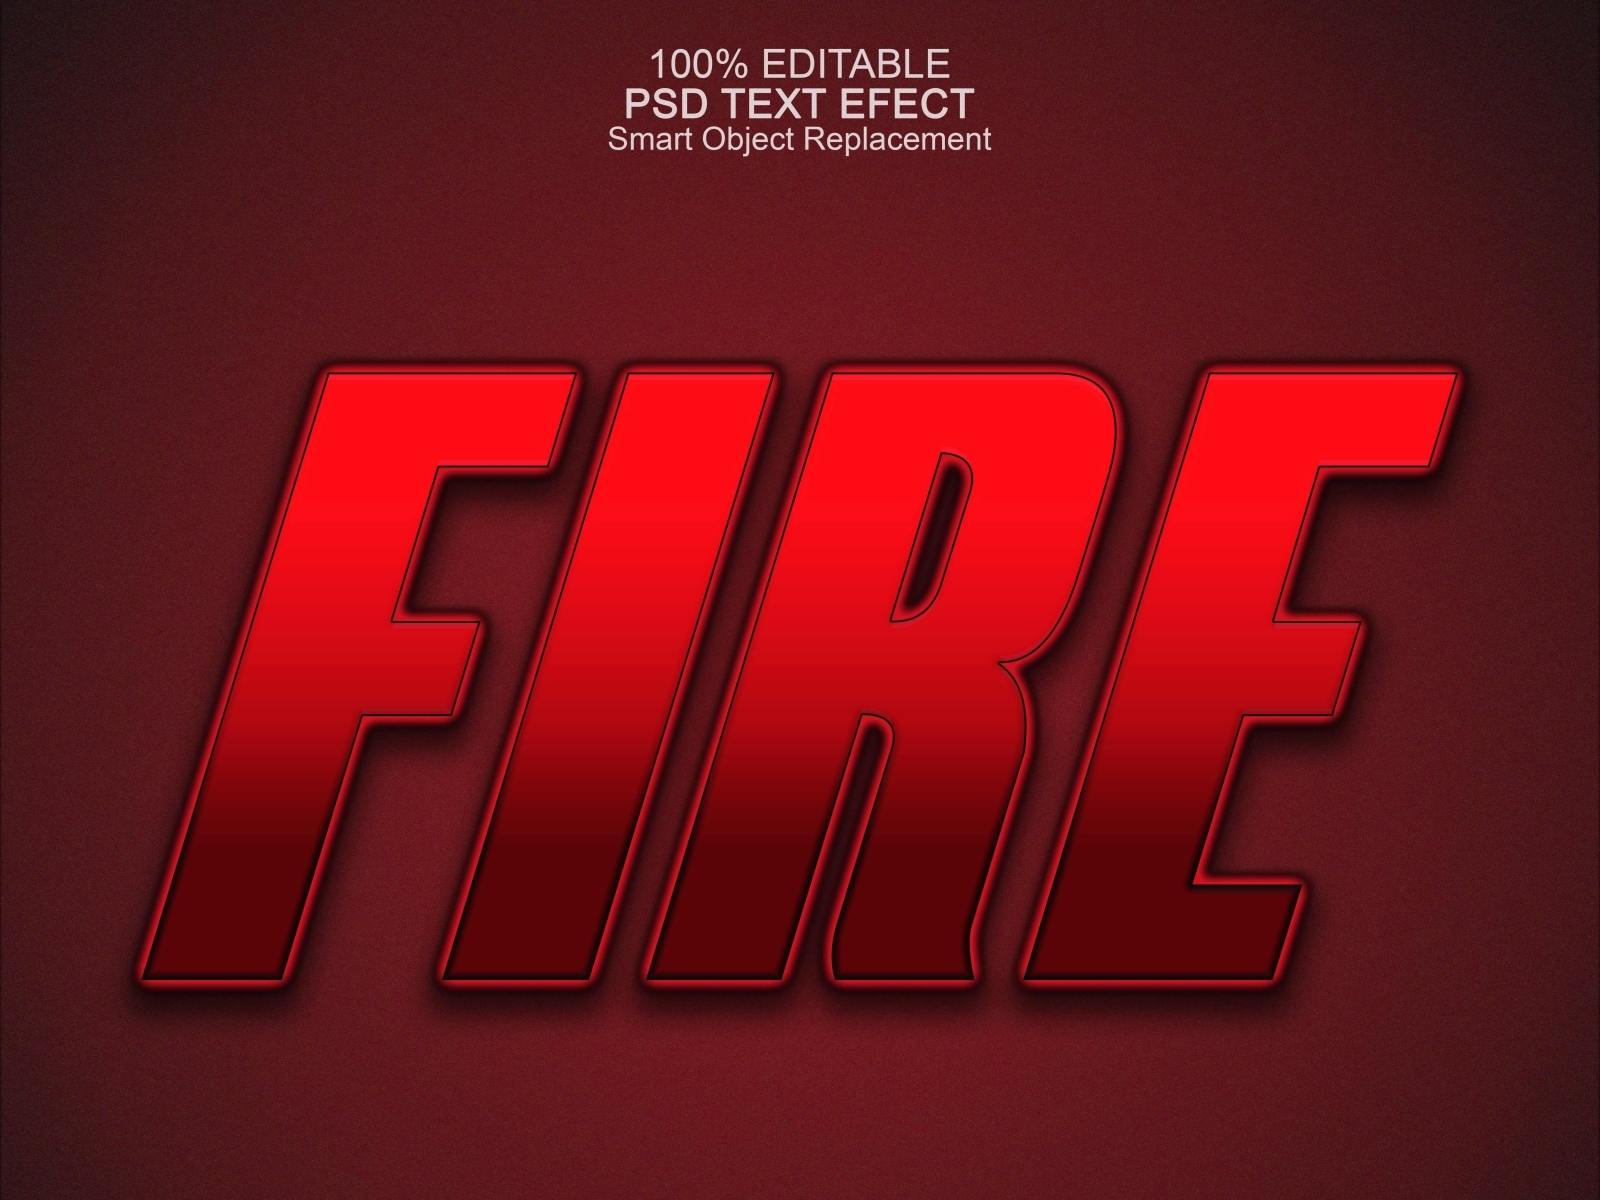 Fire text effect by Carey Han on Dribbble